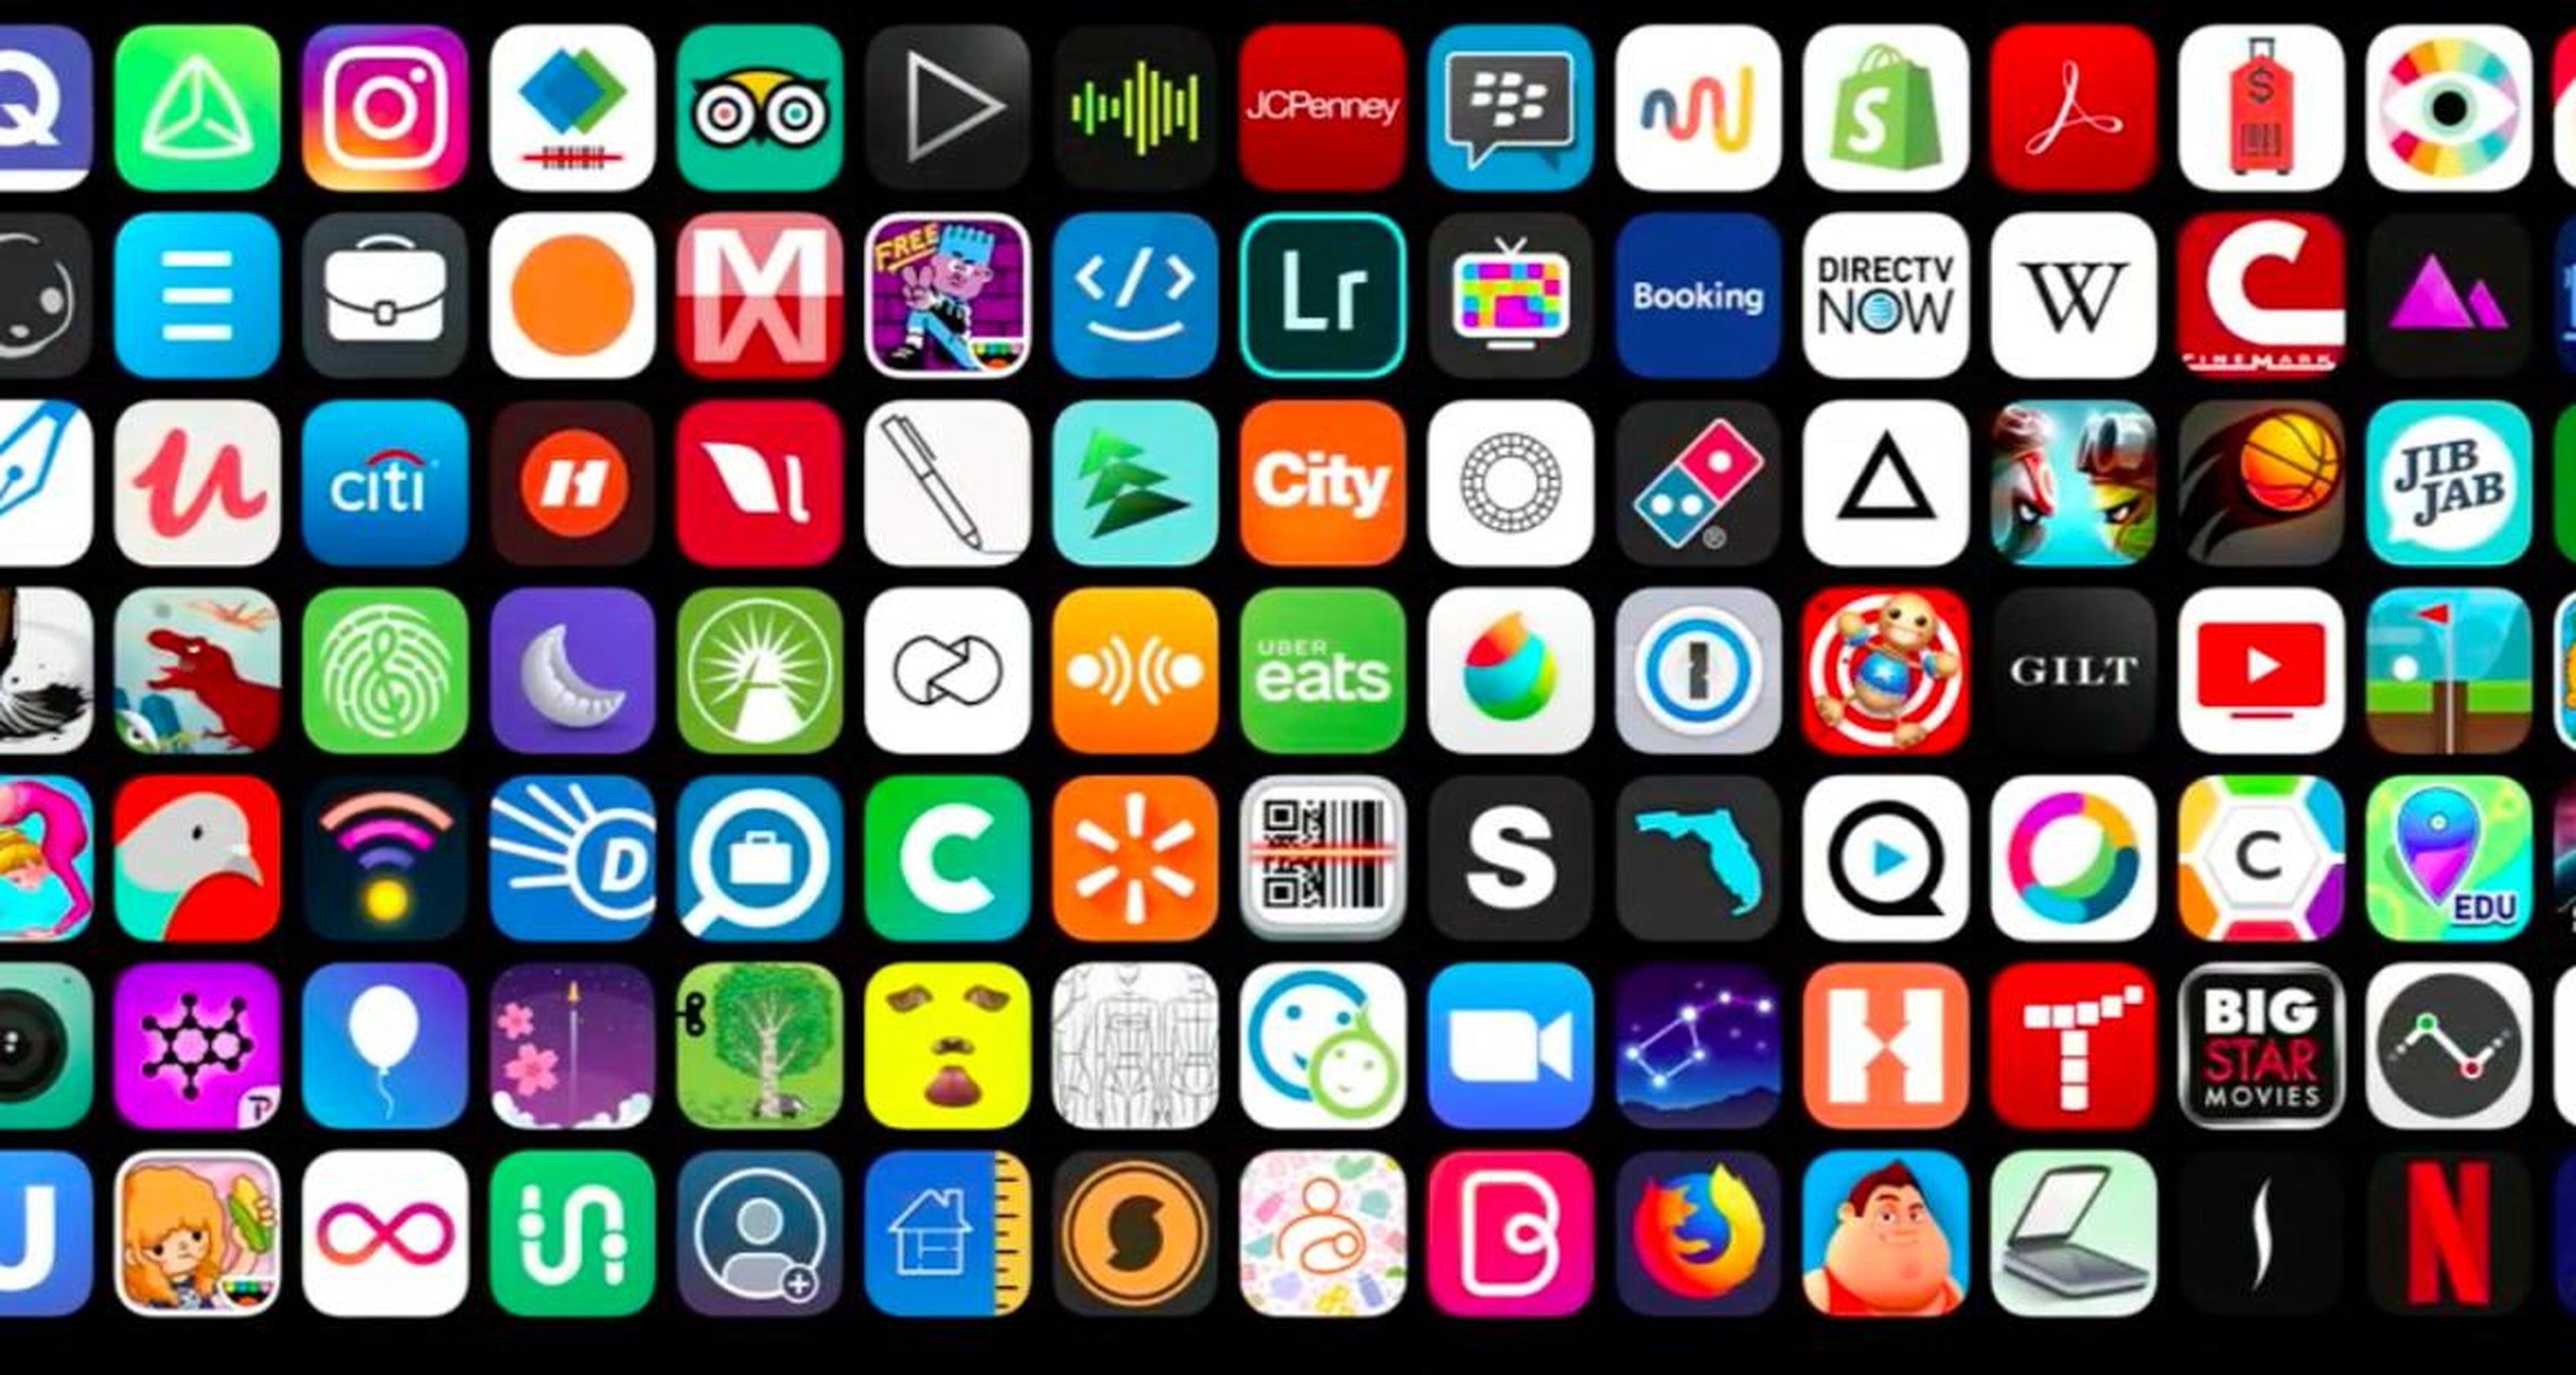 This isn't the only way to organize your iPhone apps, but if you're like me, and you have hundreds of apps, this might be a helpful place to start.